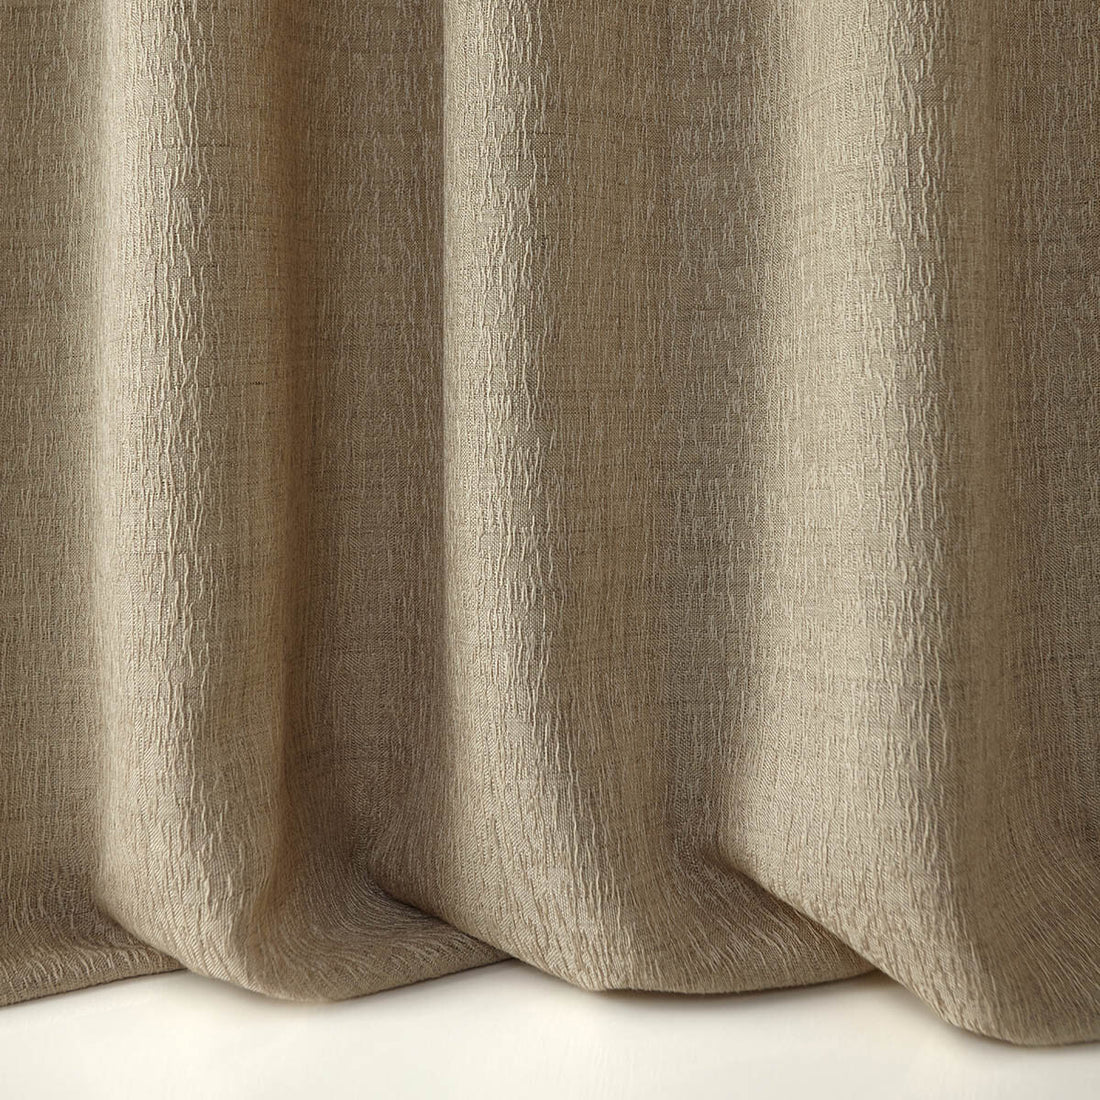 Testa fabric in 6 color - pattern LZ-30343.06.0 - by Kravet Design in the Lizzo collection